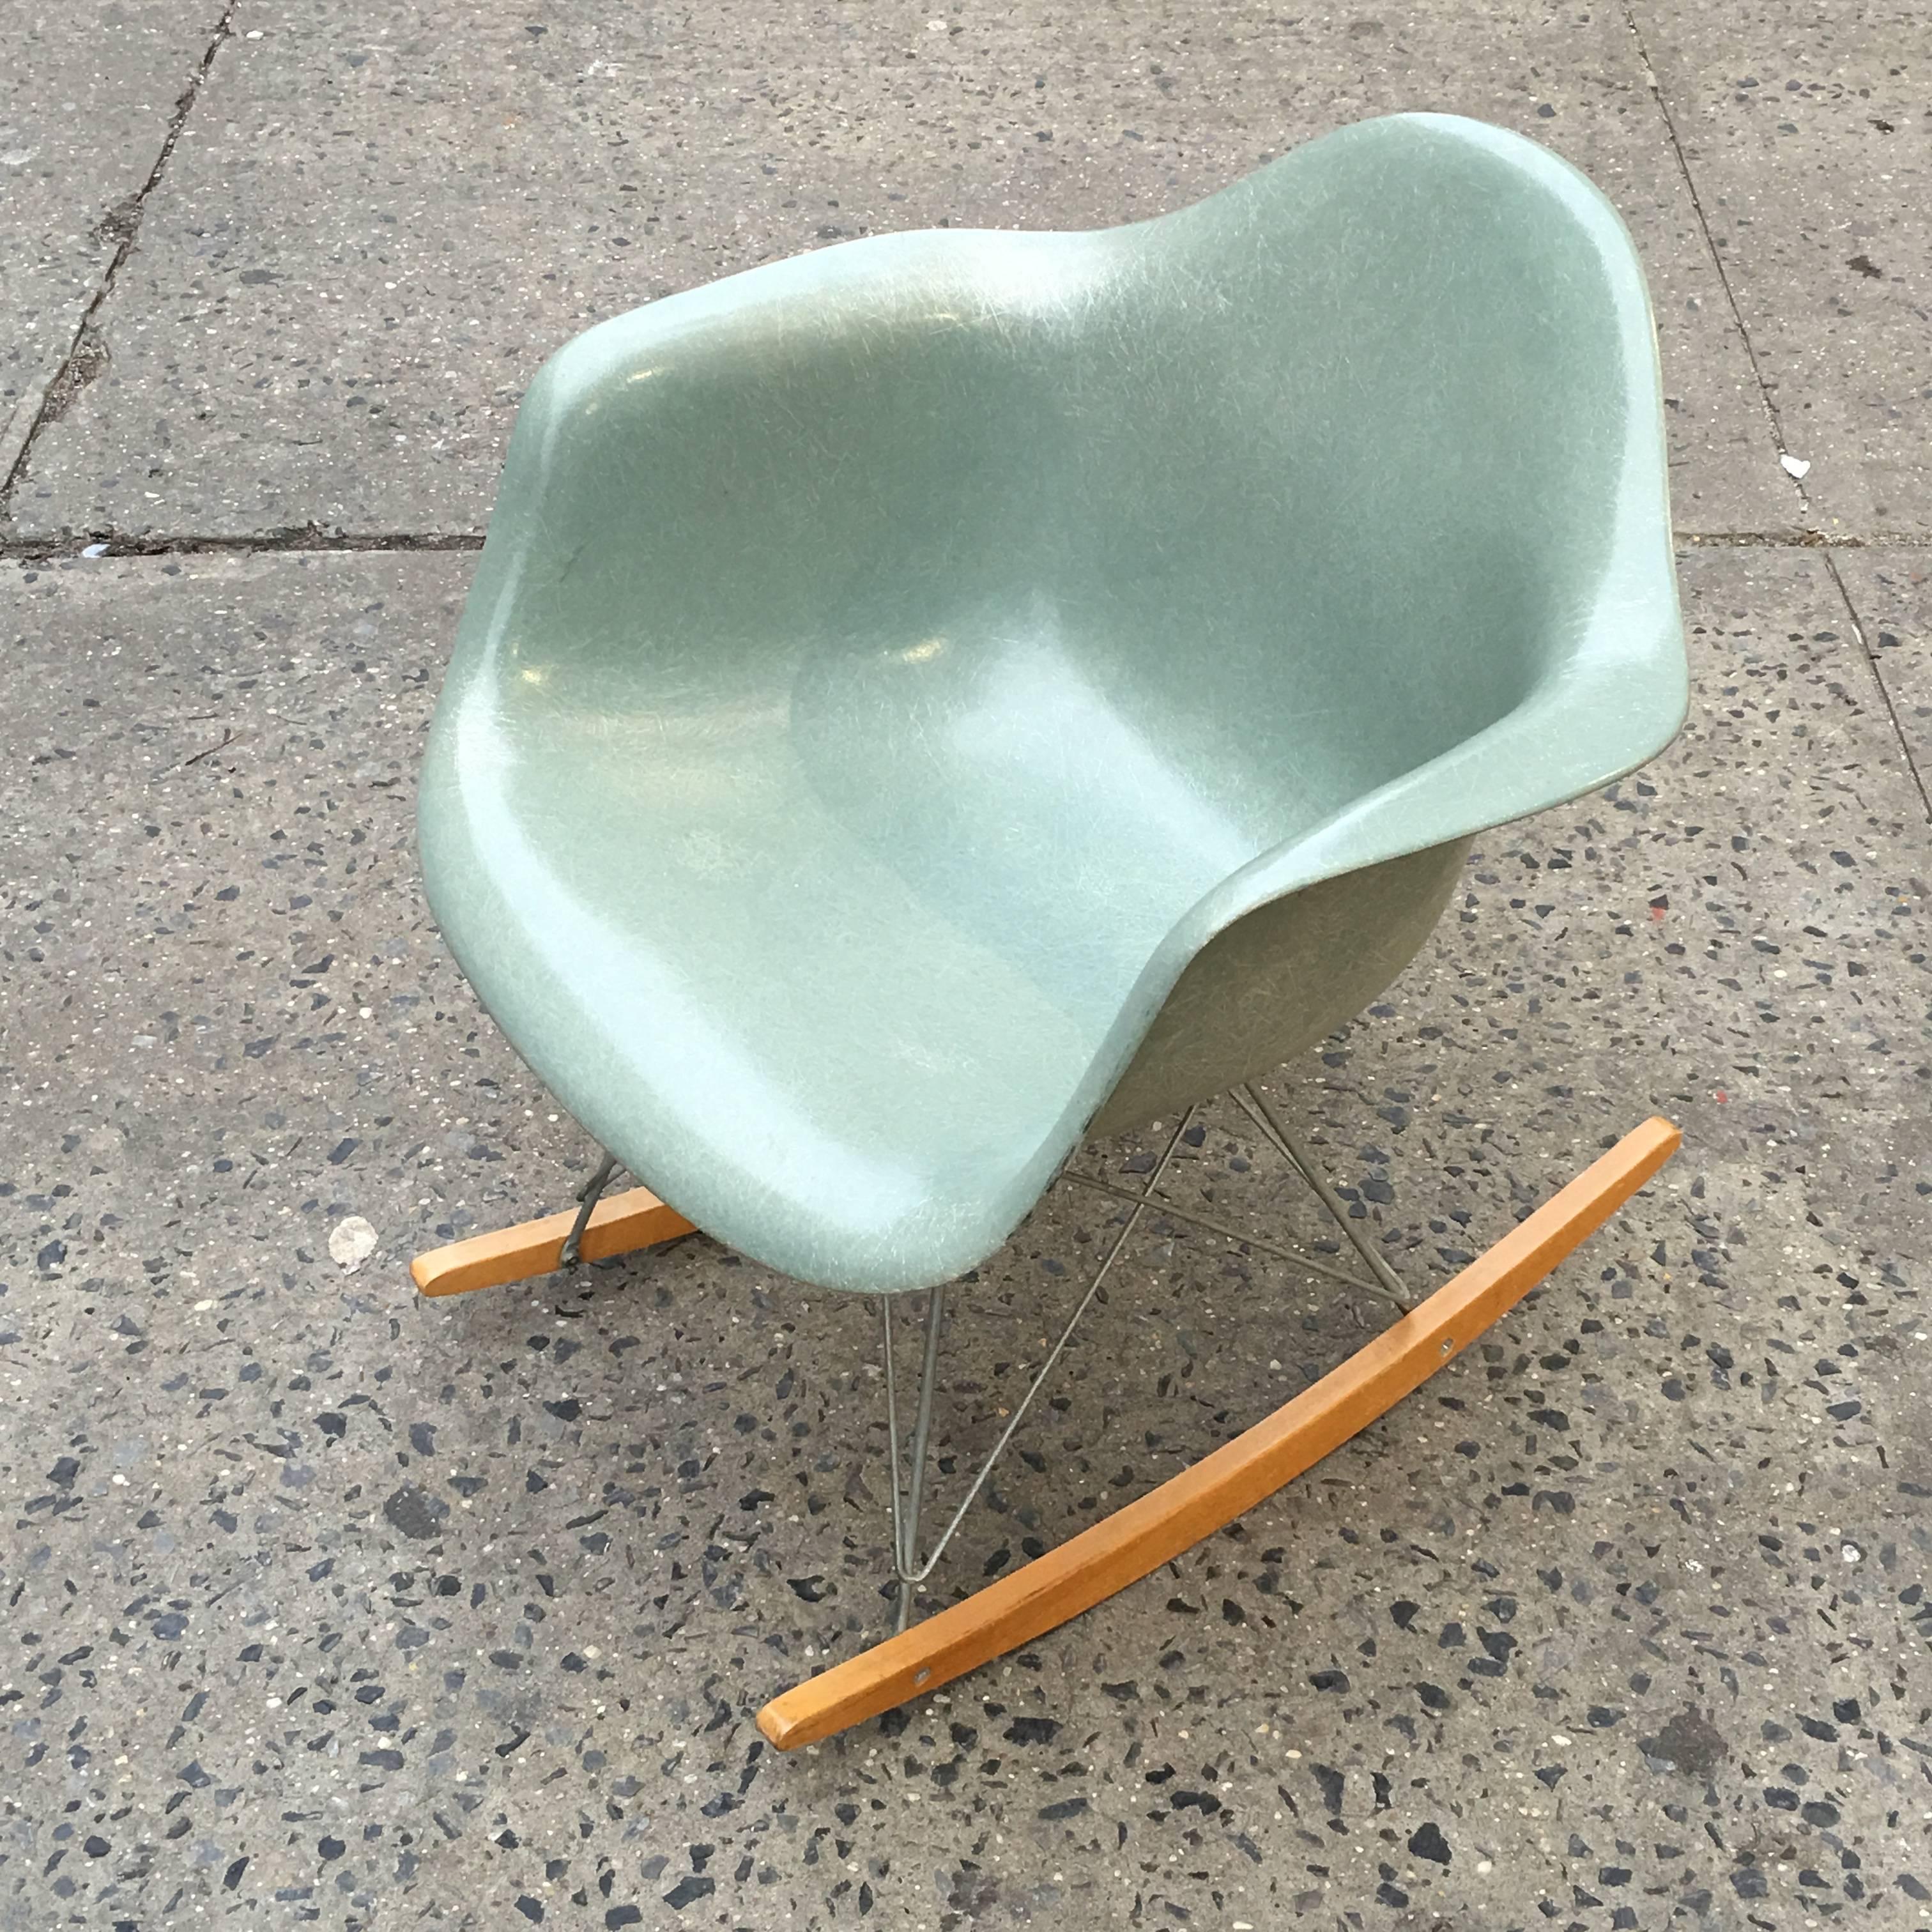 Rare Seafoam Green Herman Miller Eames shell on new base. Shell is in excellent vintage condition. No fading, cracks, or gouges. Normal wear consisten with age and use. Base available in black or chrome. Birch runners. Chair signed and dates to the